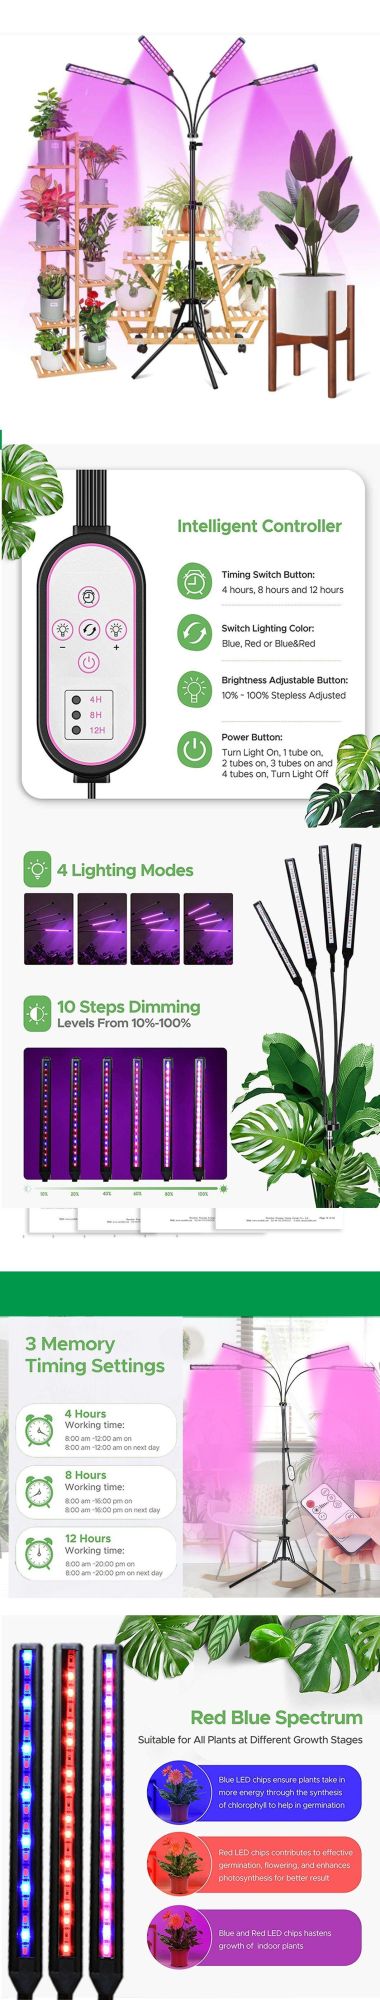 Timeable and Convenient Portable LED Plant Growth Lamp with USB Port